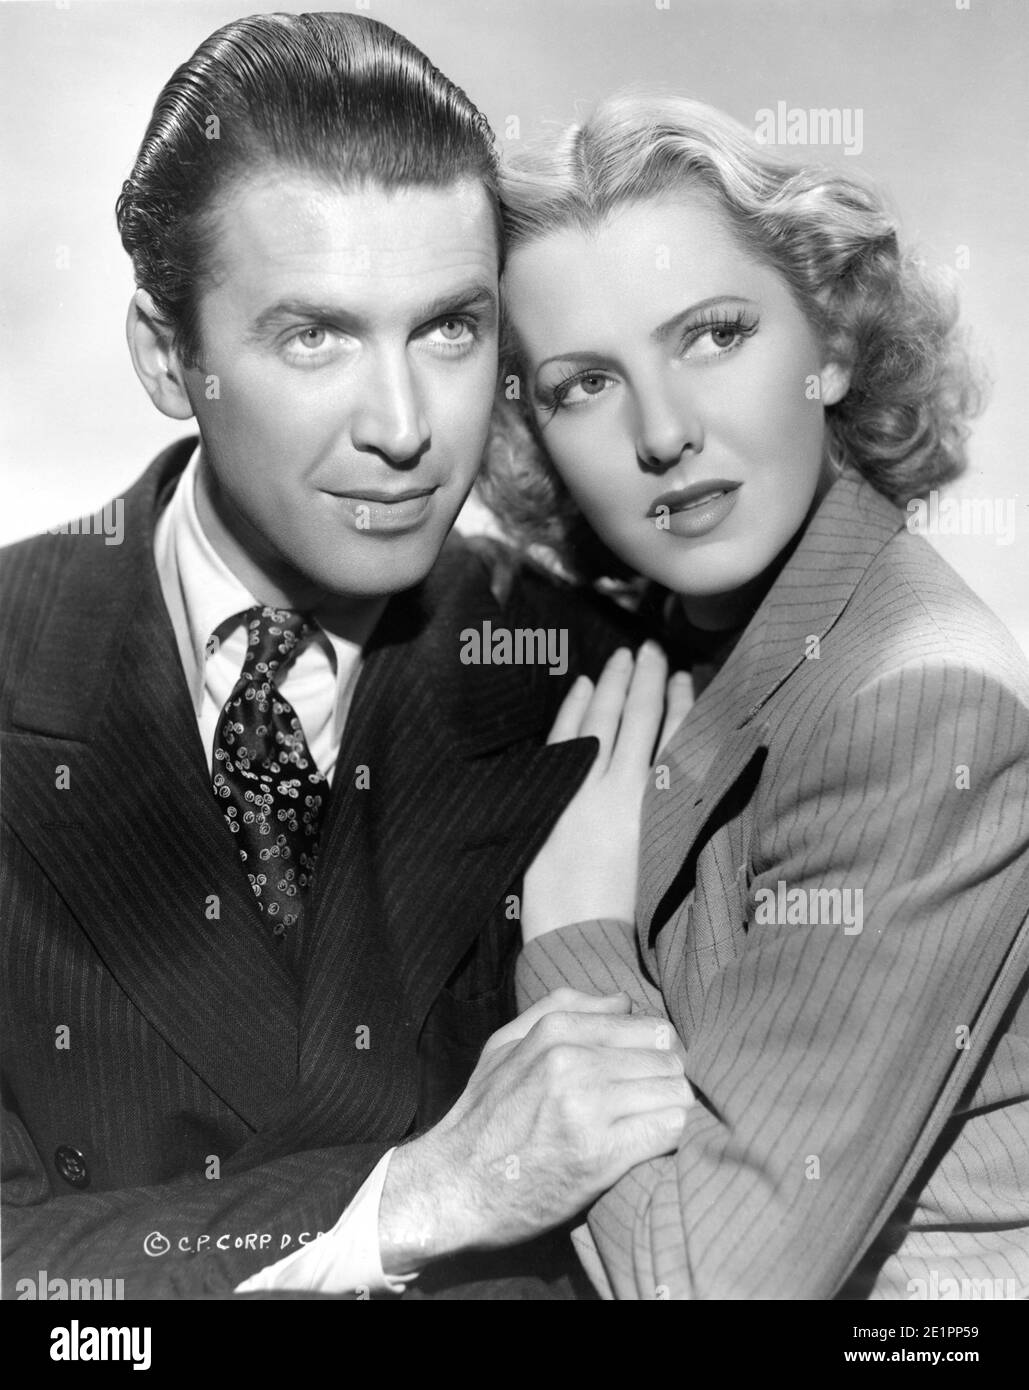 JAMES STEWART and JEAN ARTHUR publicity portrait for MR. SMITH GOES TO WASHINGTON 1939 director FRANK CAPRA story Lewis R. Foster screenplay Sidney Buchman Columbia Pictures Stock Photo